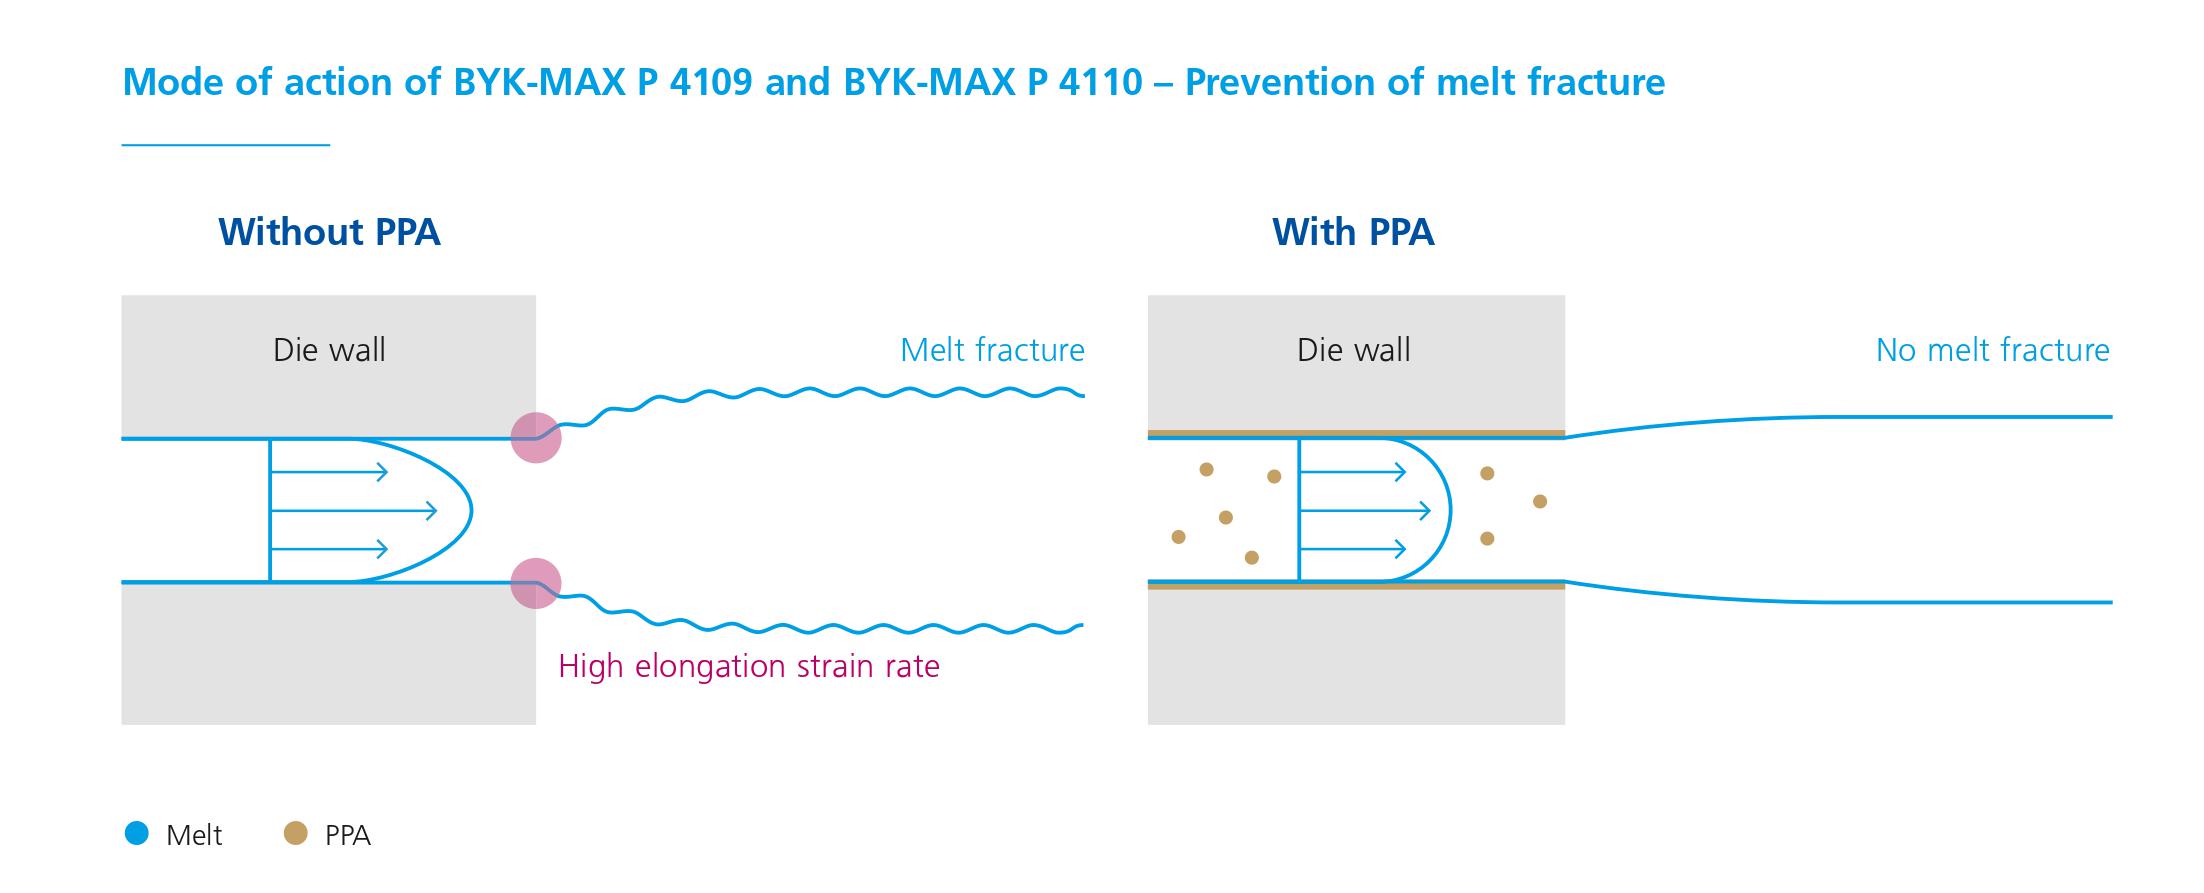 [Translate to Japanese:] Mode of action of BYK-MAX P 4109 and P 4110